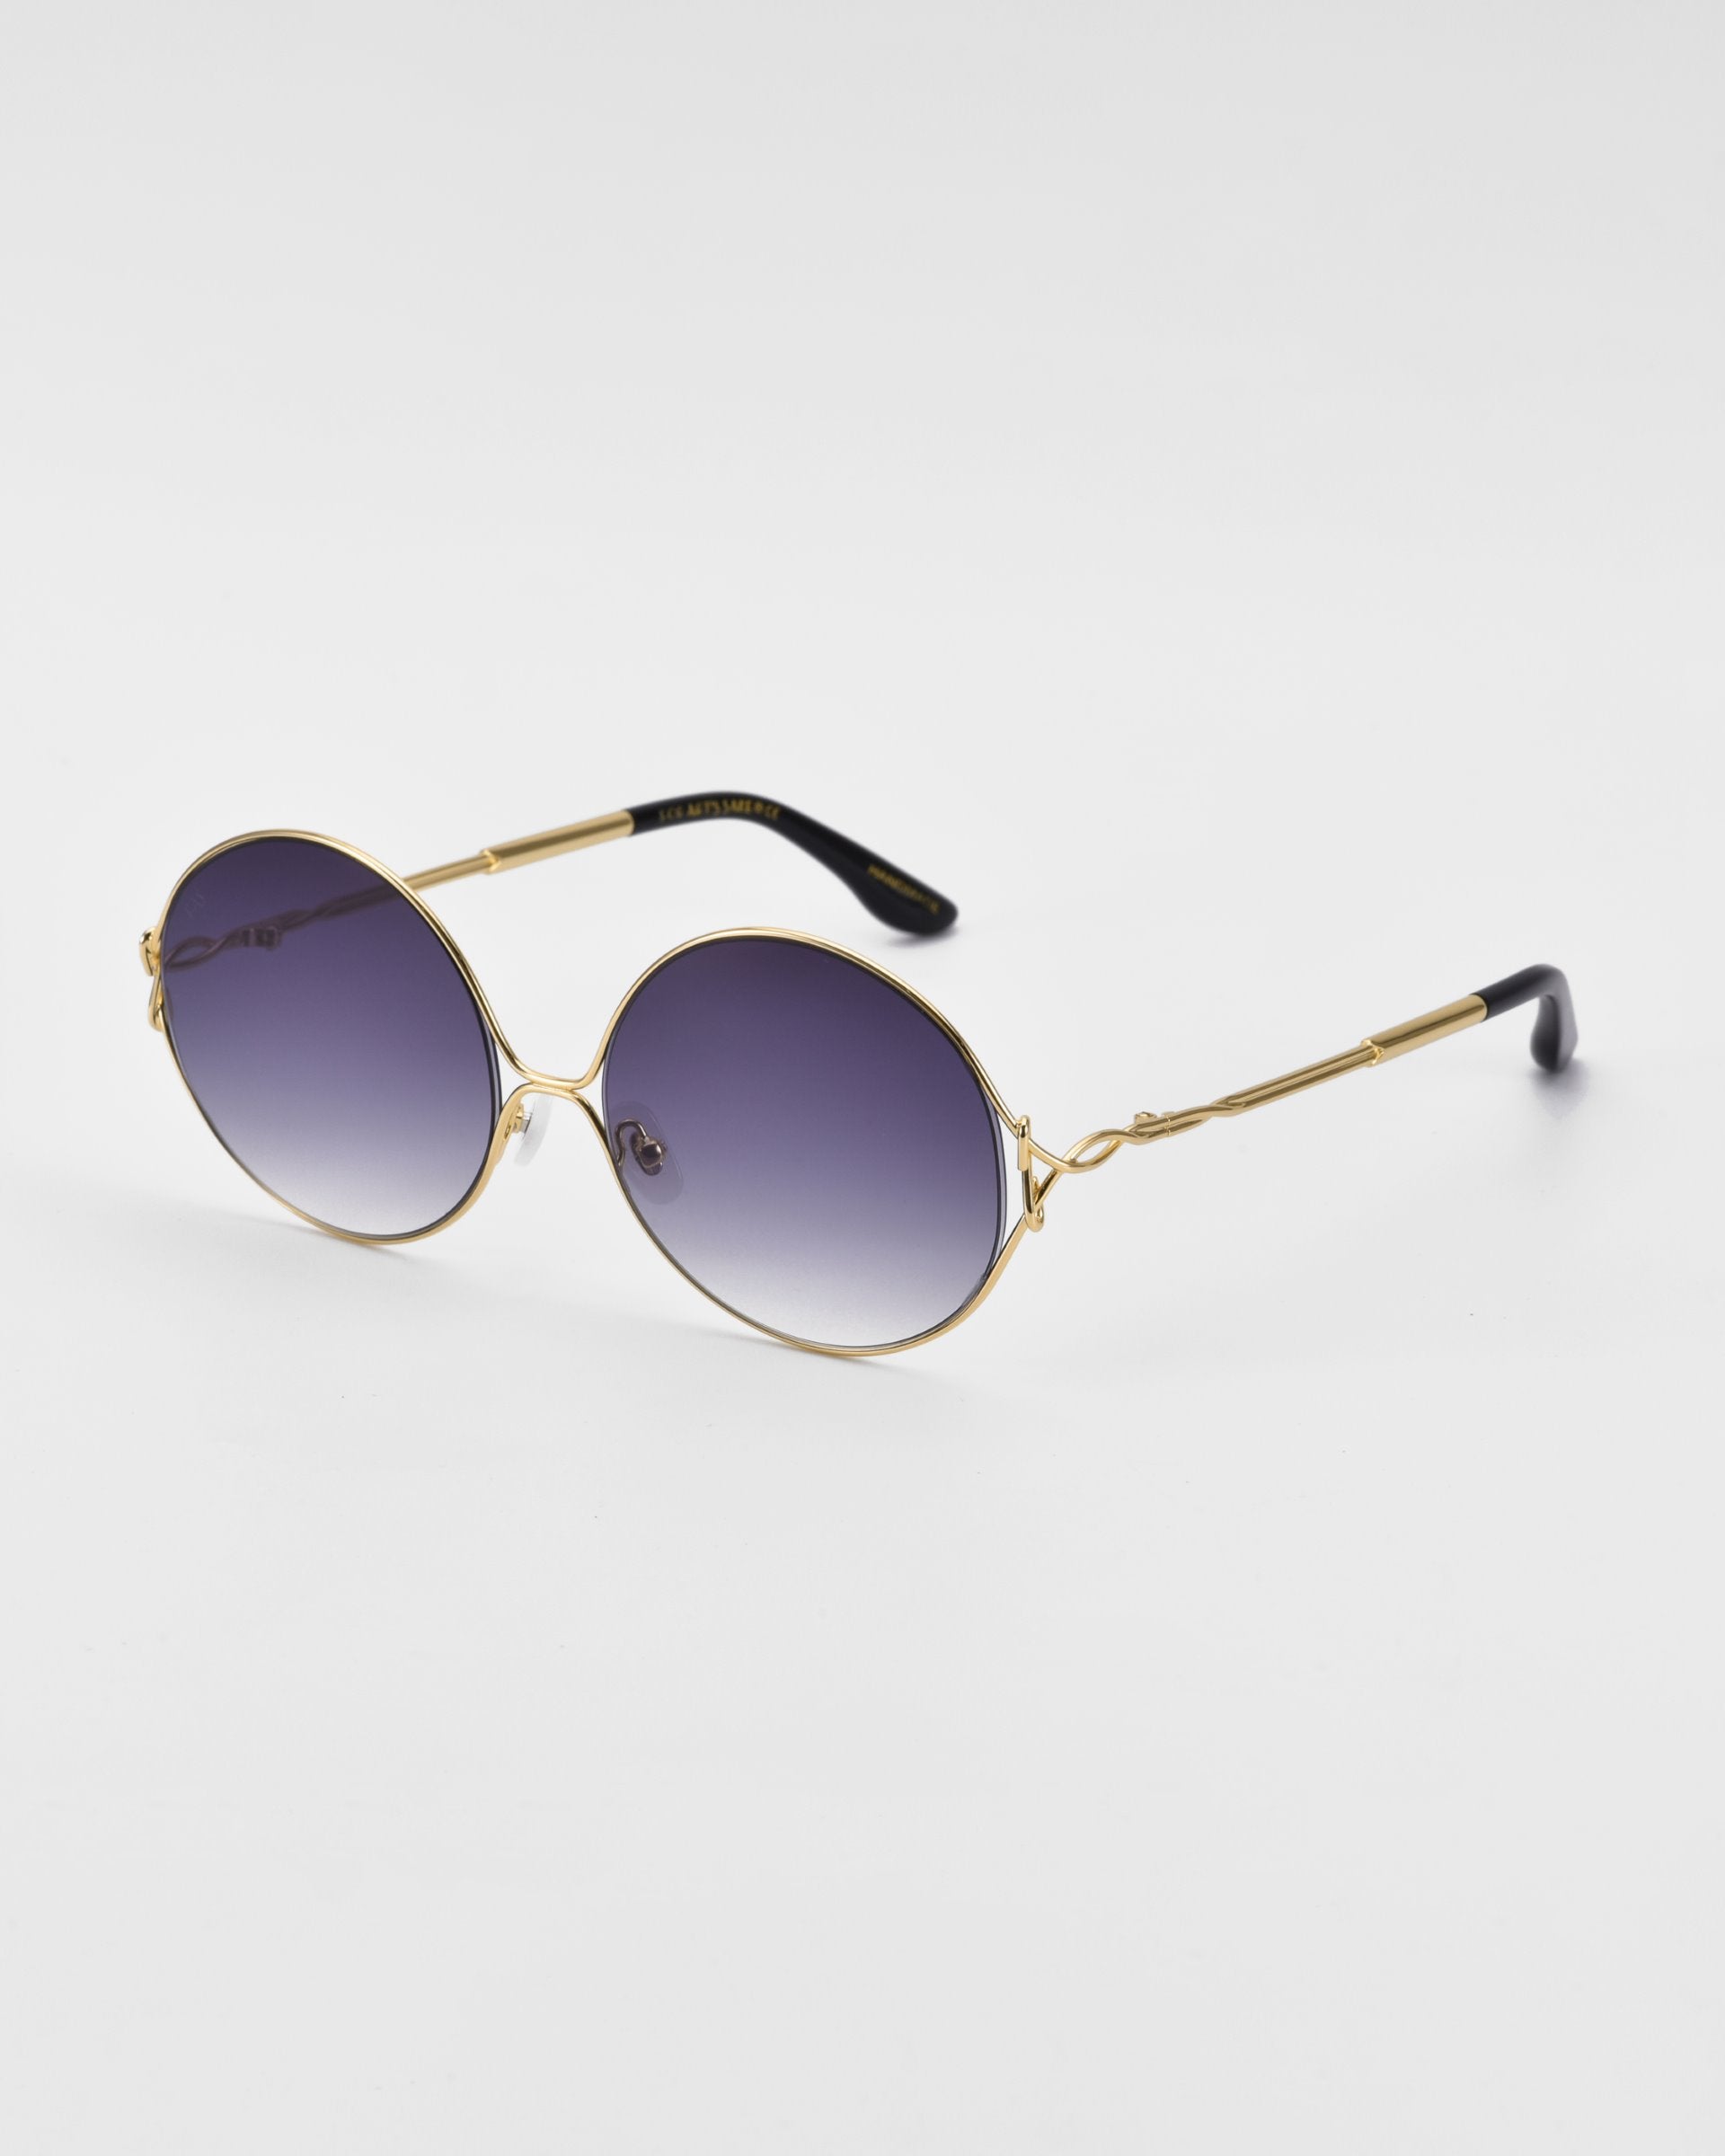 A pair of sleek, retro-inspired For Art&#39;s Sake® Aura sunglasses with gold-colored metal frames and gradient dark lenses are placed on a plain white background. The temples are thin with black tips, and the overall design is minimalist and stylish.